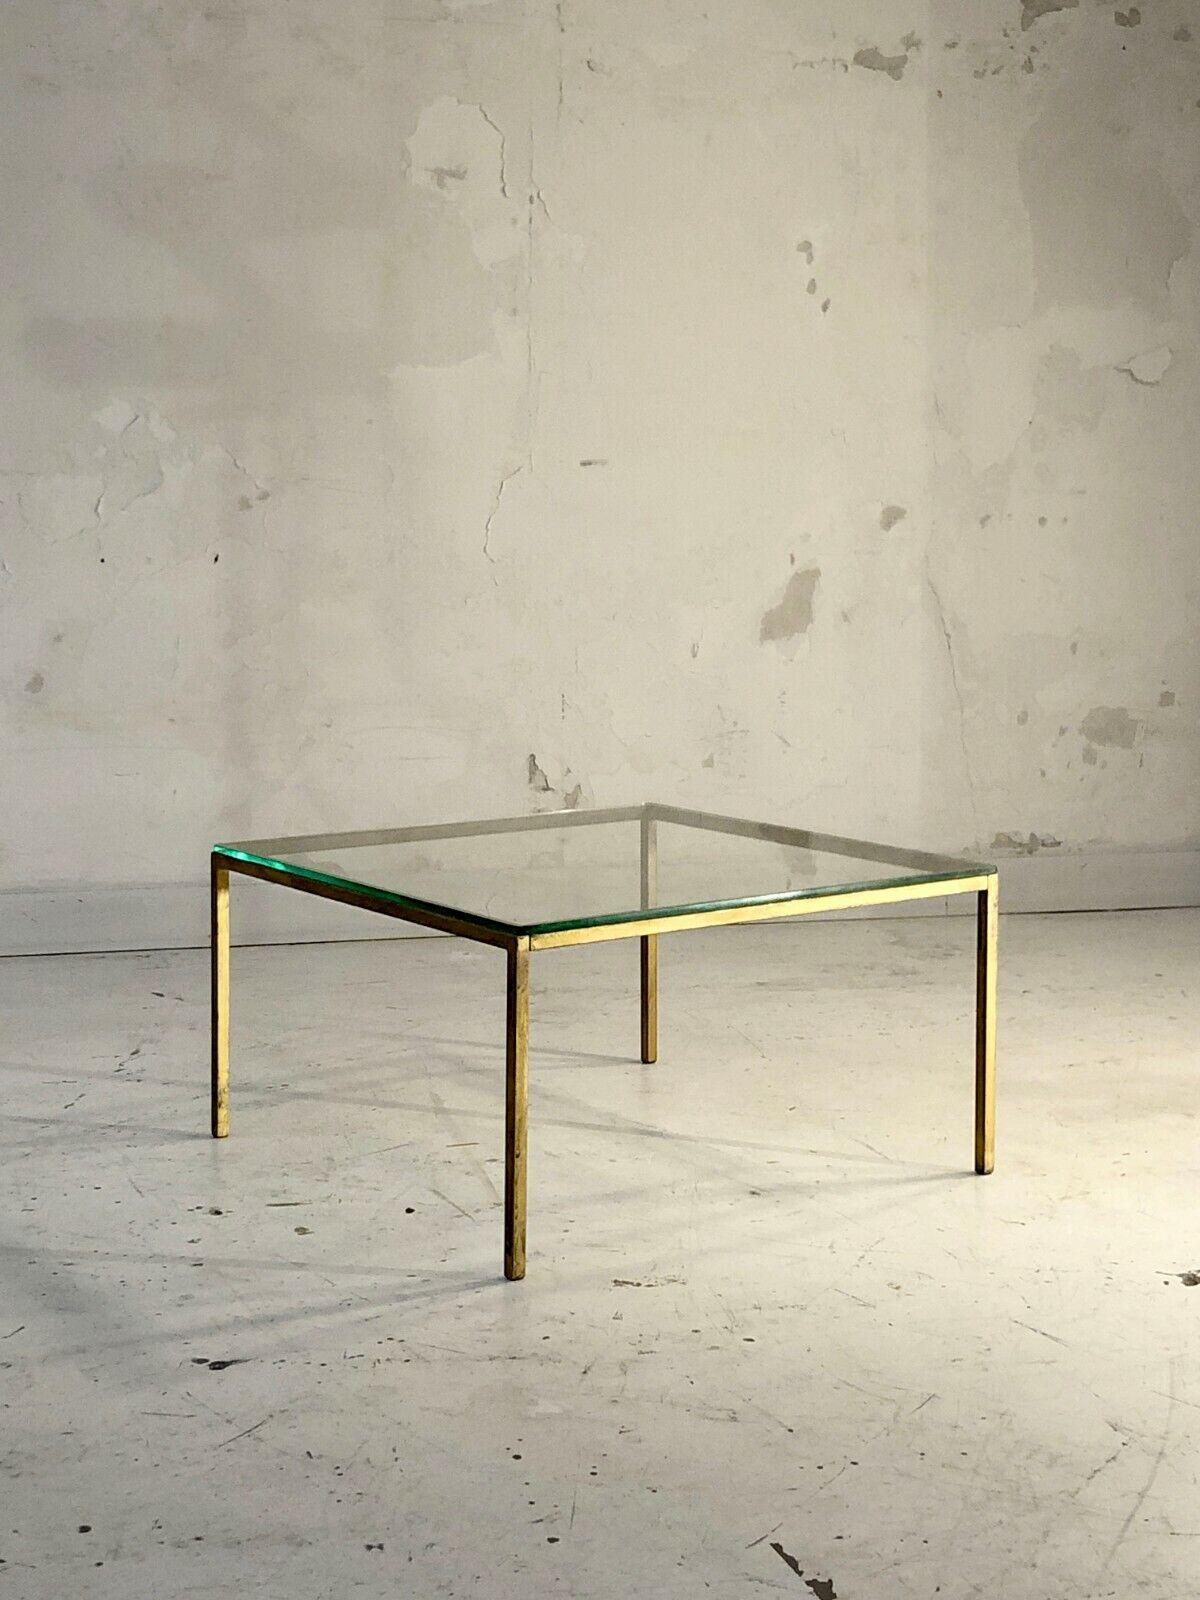 A NEO-CLASSICAL ART-DECO MODERNIST Side COFFEE TABLE, ROGER THIBIER, Frankreich 1970 im Angebot 1